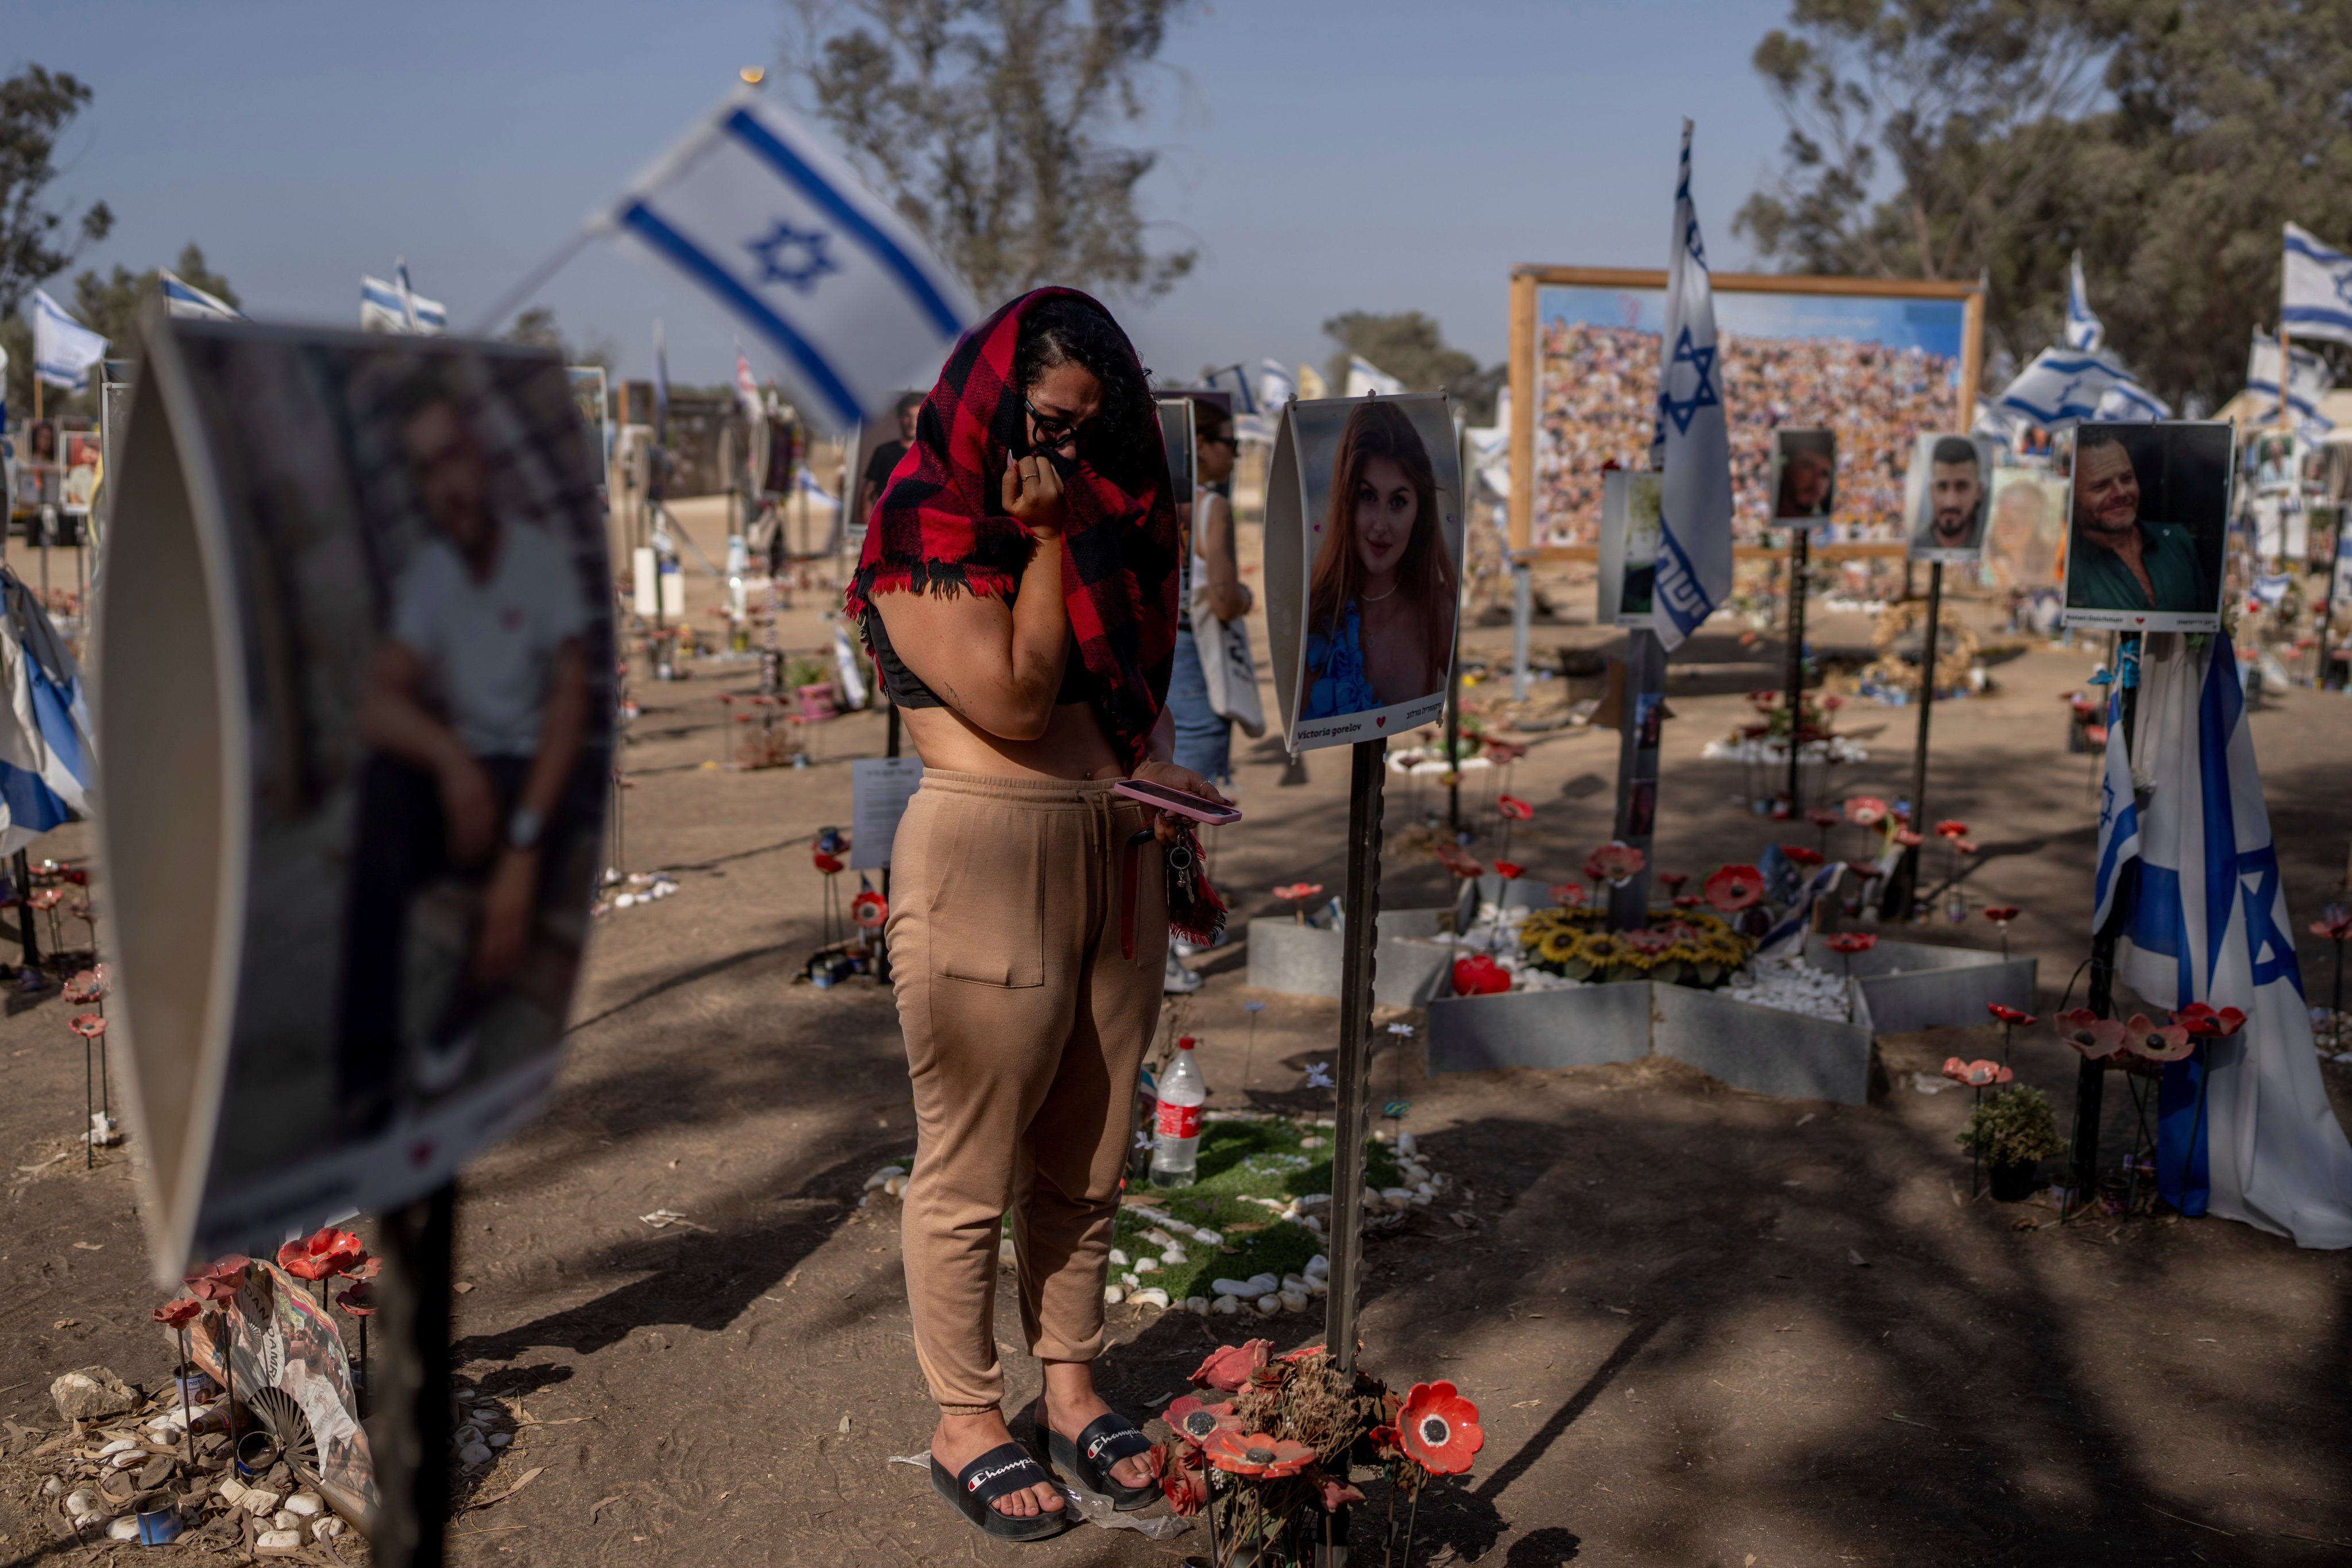 A woman stands next to photos of people killed and taken captive by Hamas militants during their violent rampage through the Nova music festival in southern Israel. Photo: AP